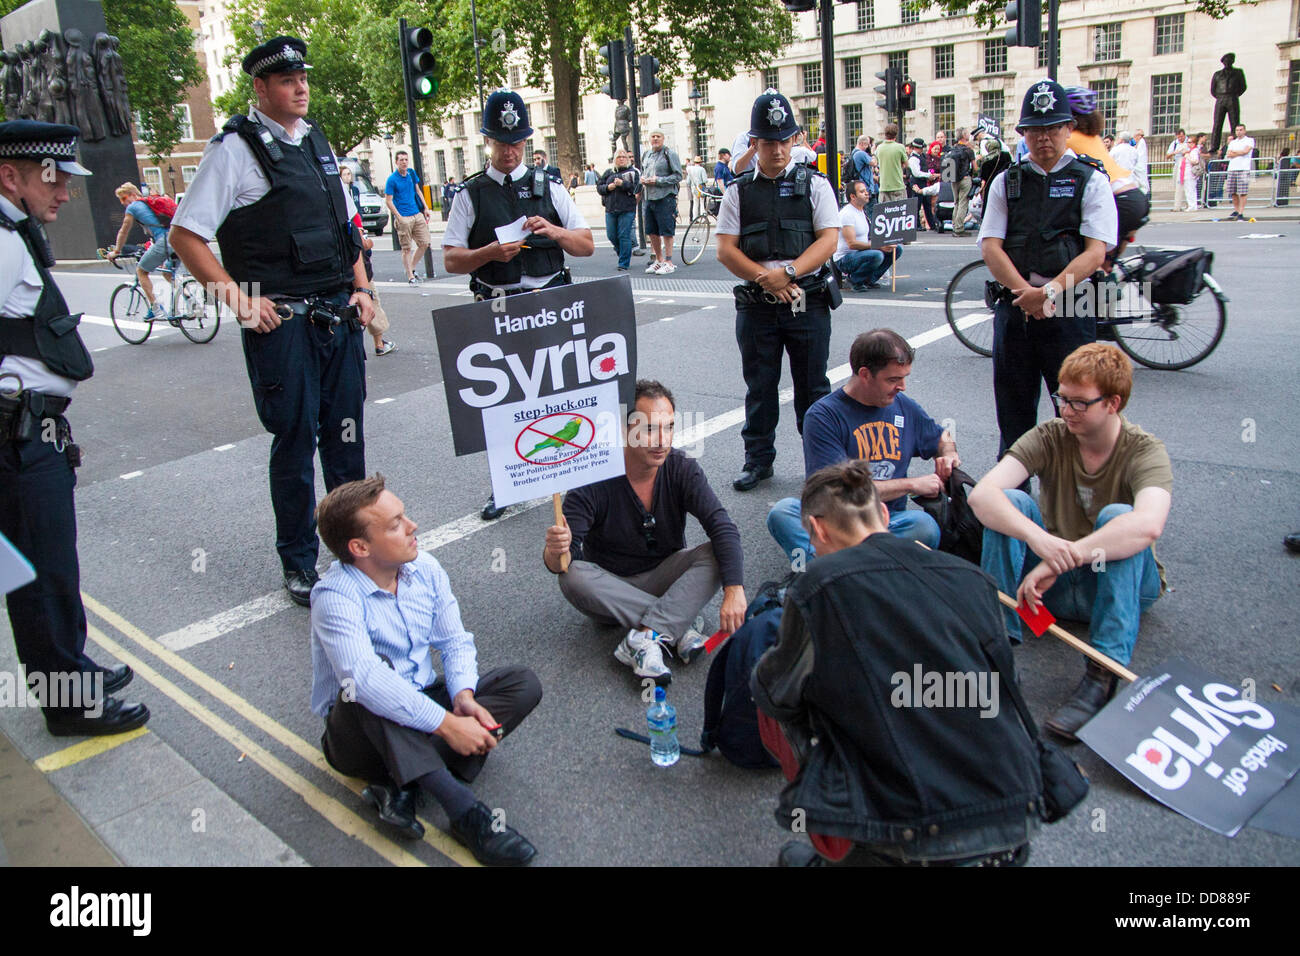 London, UK. 28th Aug, 2013. Police stand by to remove activists blocking Whitehall during a protest against possible intervention by the UK in the ongoing Syrian conflict following chemical weapons attacks, Blamed on the Assad regime, on civilians. Credit:  Paul Davey/Alamy Live News Stock Photo